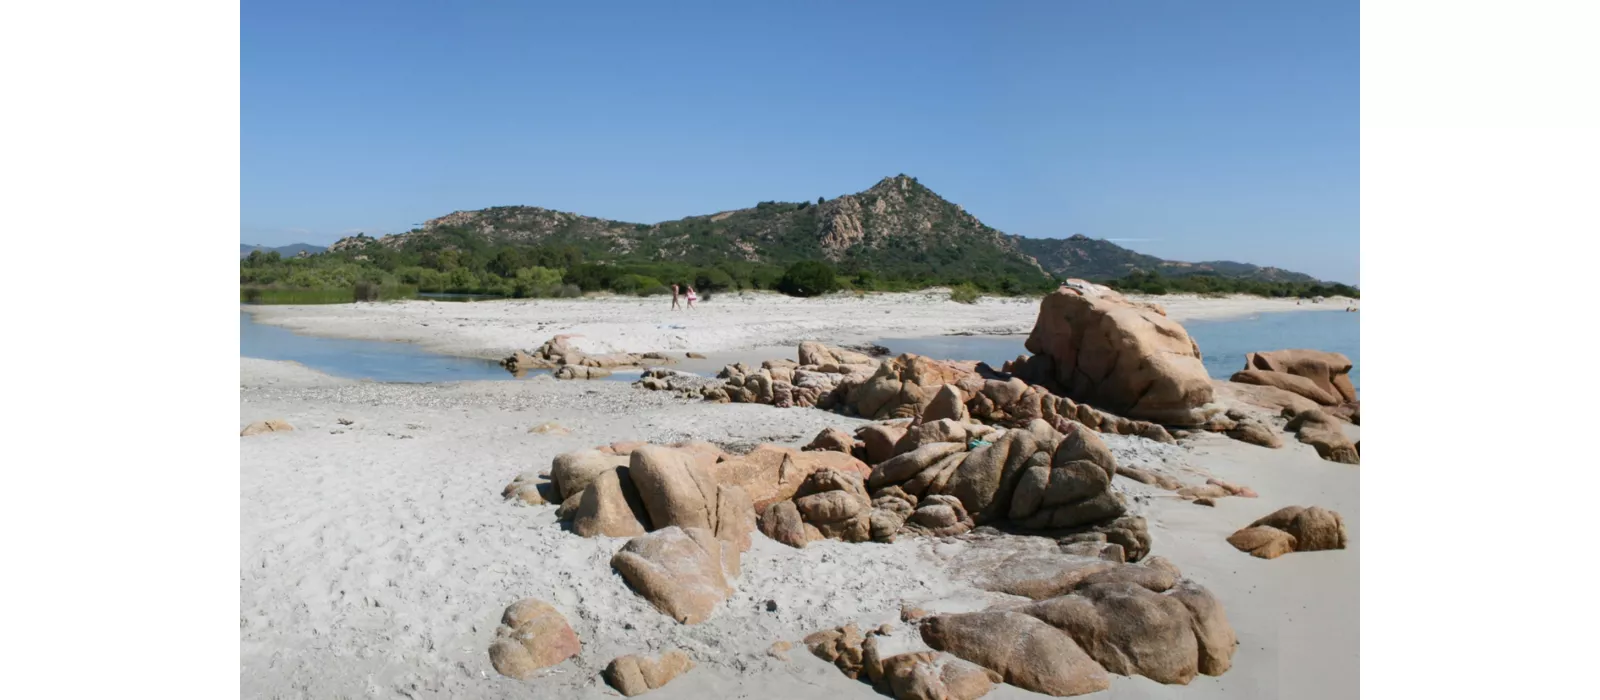 Discovering the Baronie: a corner of authentic Sardinia tucked between the sea and the mountains